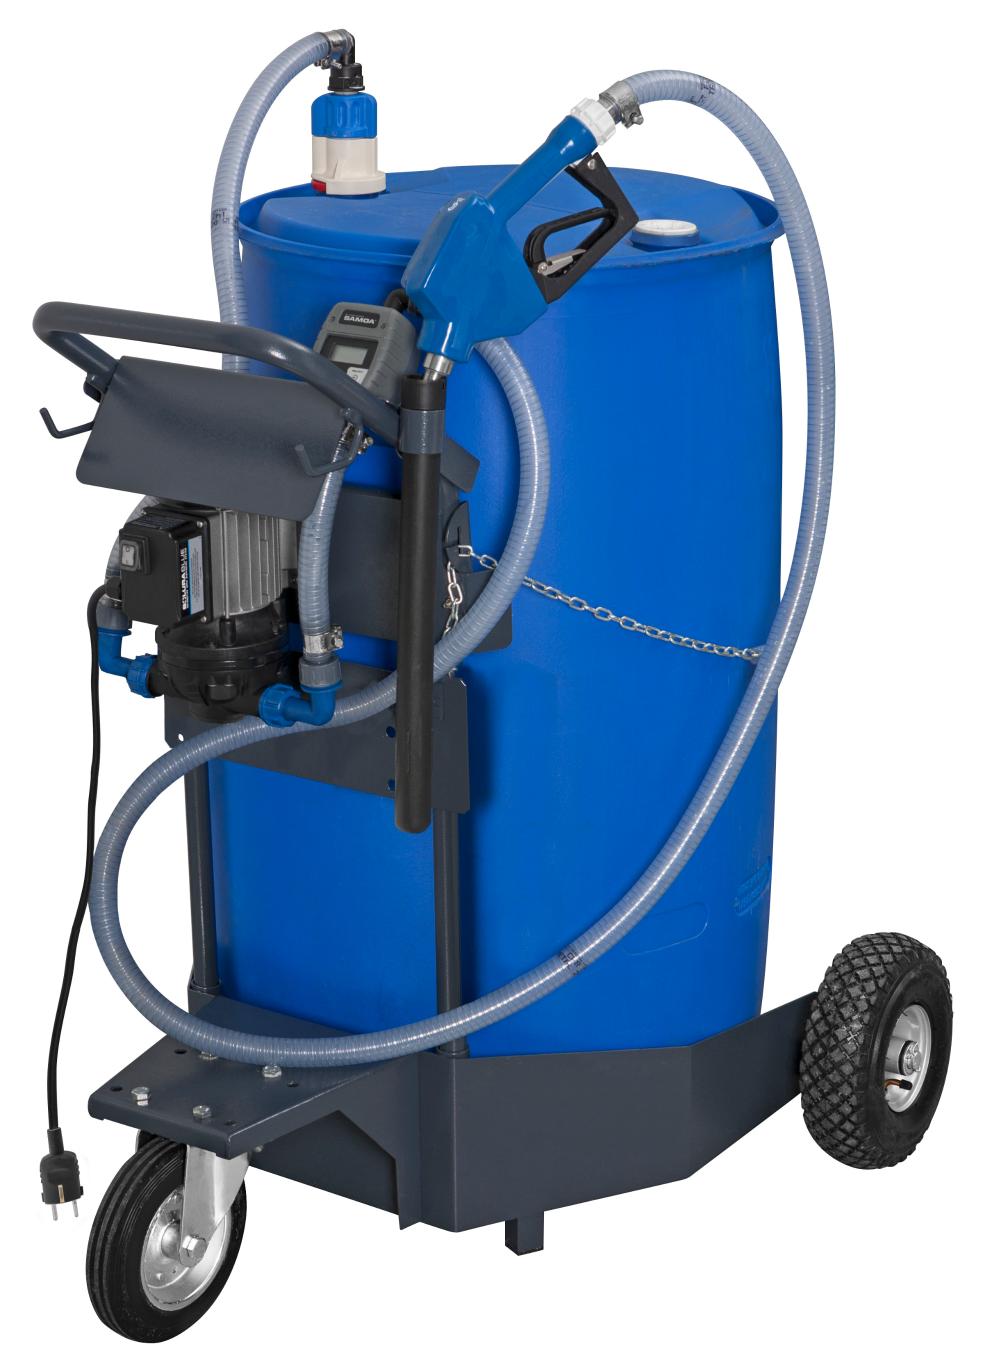 230 V SOLURA SERIES MOBILE ELECTRIC PUMP PACKAGE FOR ADBLUE/DEF WITH AUTOMATIC NOZZLE AND METER, 205 L DRUMS, 30 L/MIN